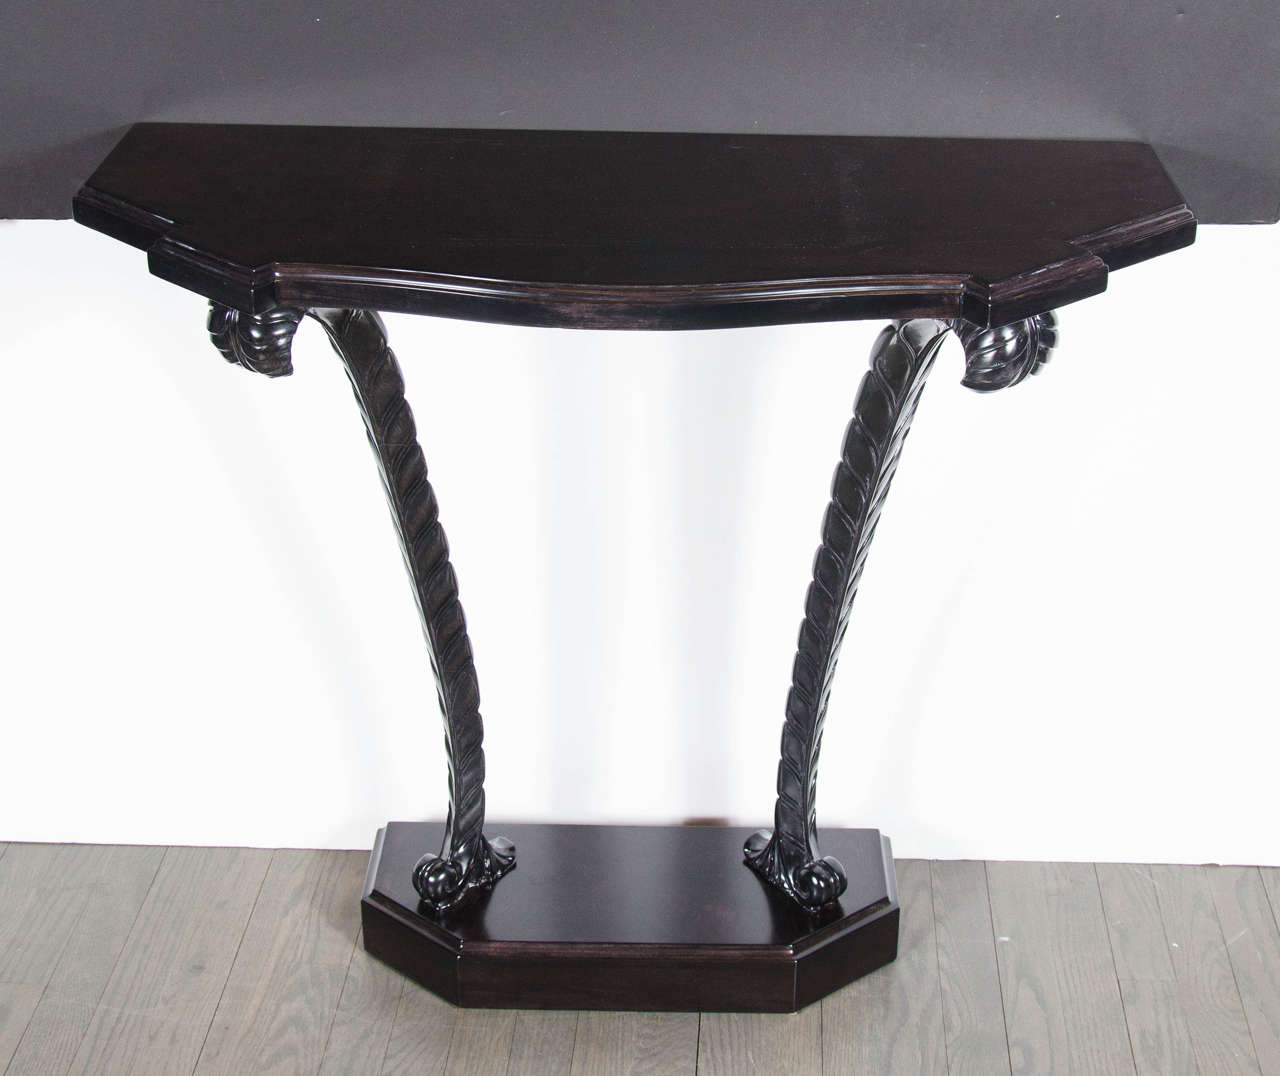 1940s Hollywood Regency plume console table by Grosfeld House in ebonized walnut. This elegant console table by Grosfeld House has a pedestal base with a stepped top design. The top of the console mimics the tables base but with more fluidity in its